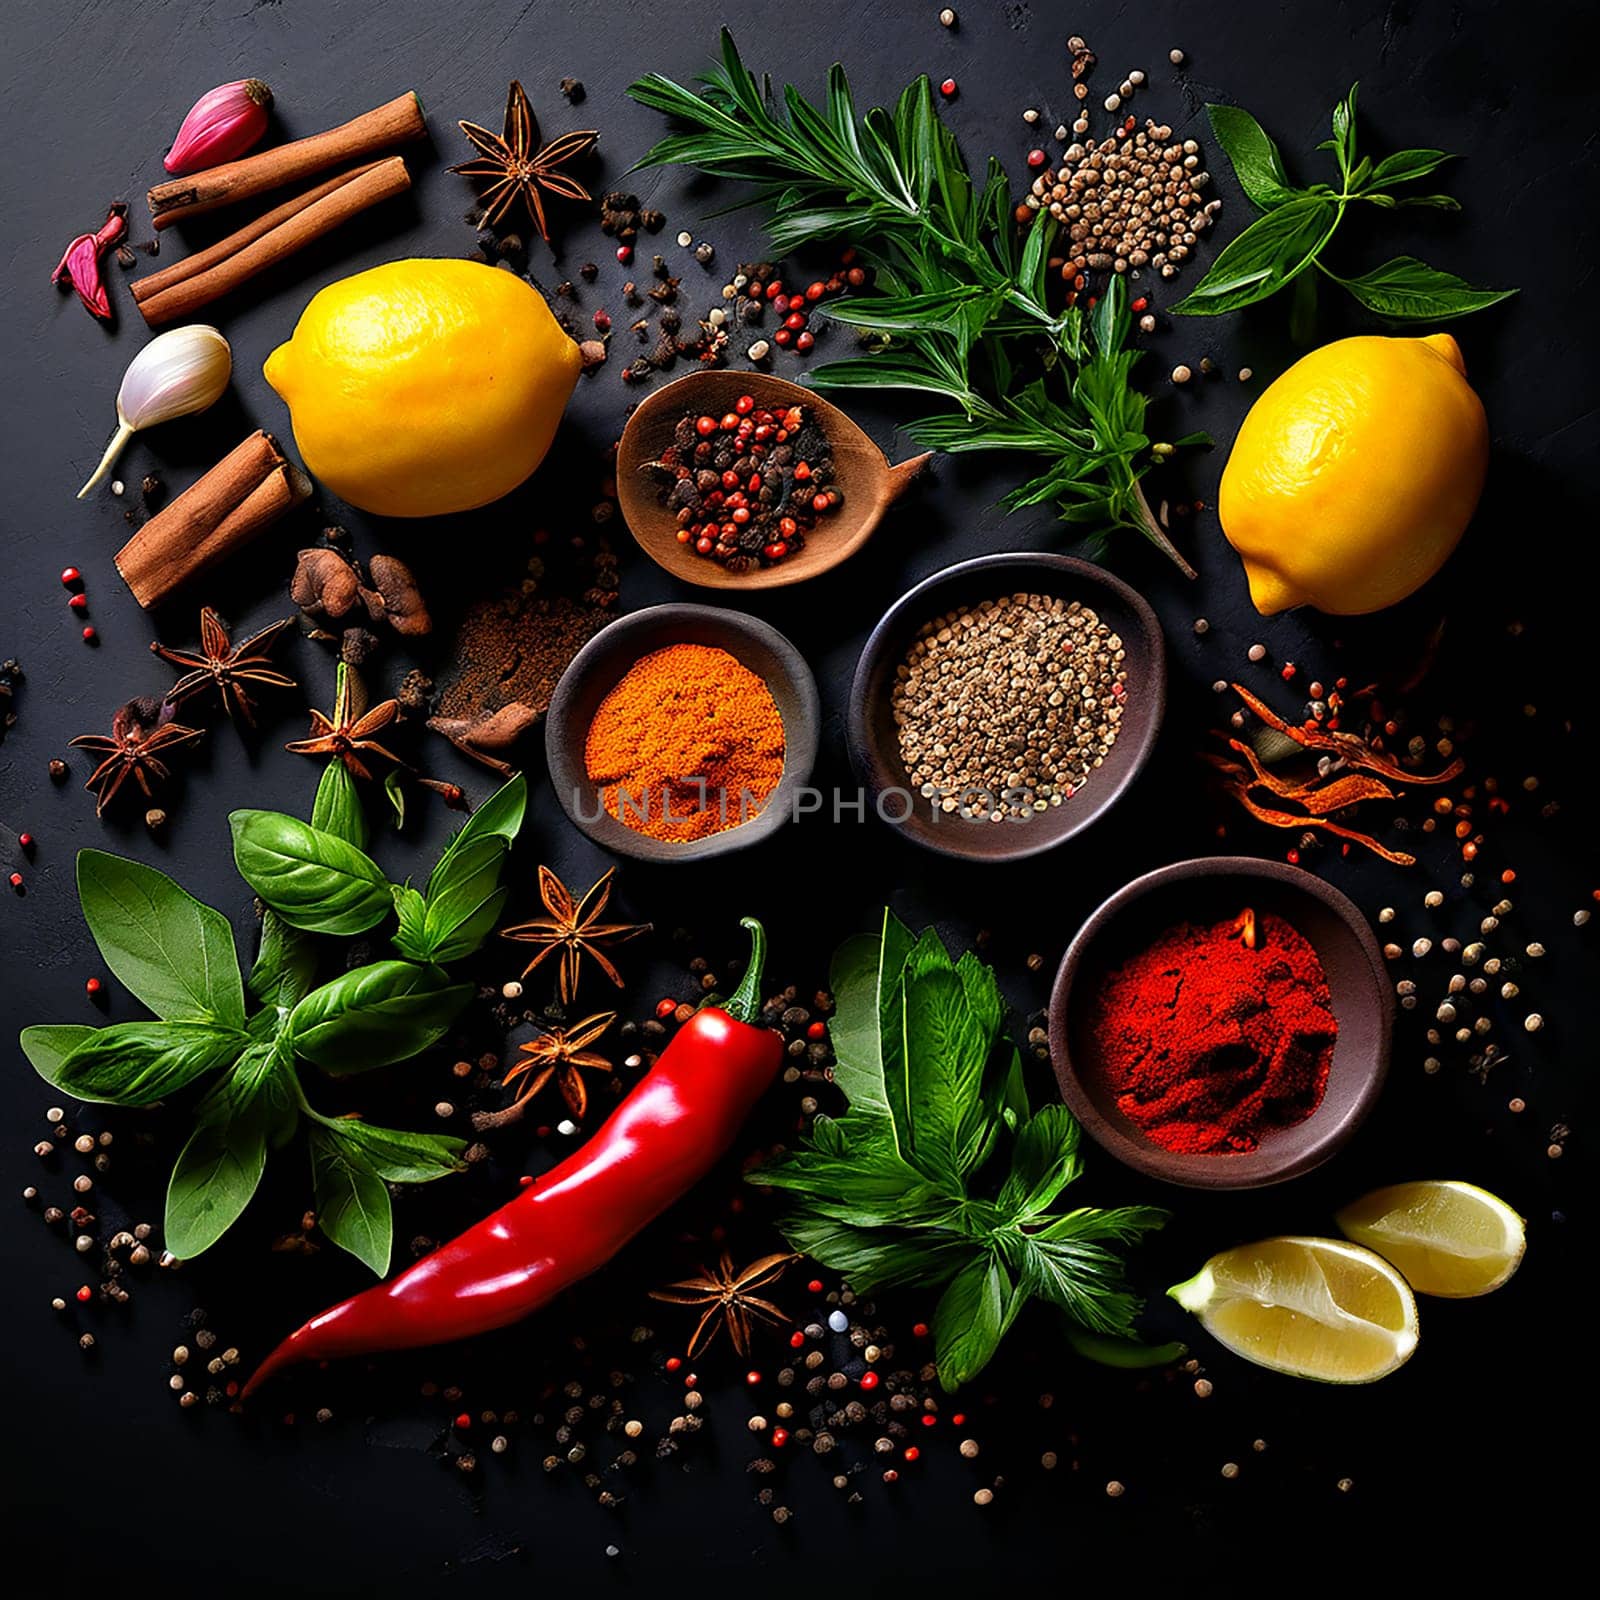 Culinary Delight: Colorful Herbs and Spices on Dark Background by Petrichor